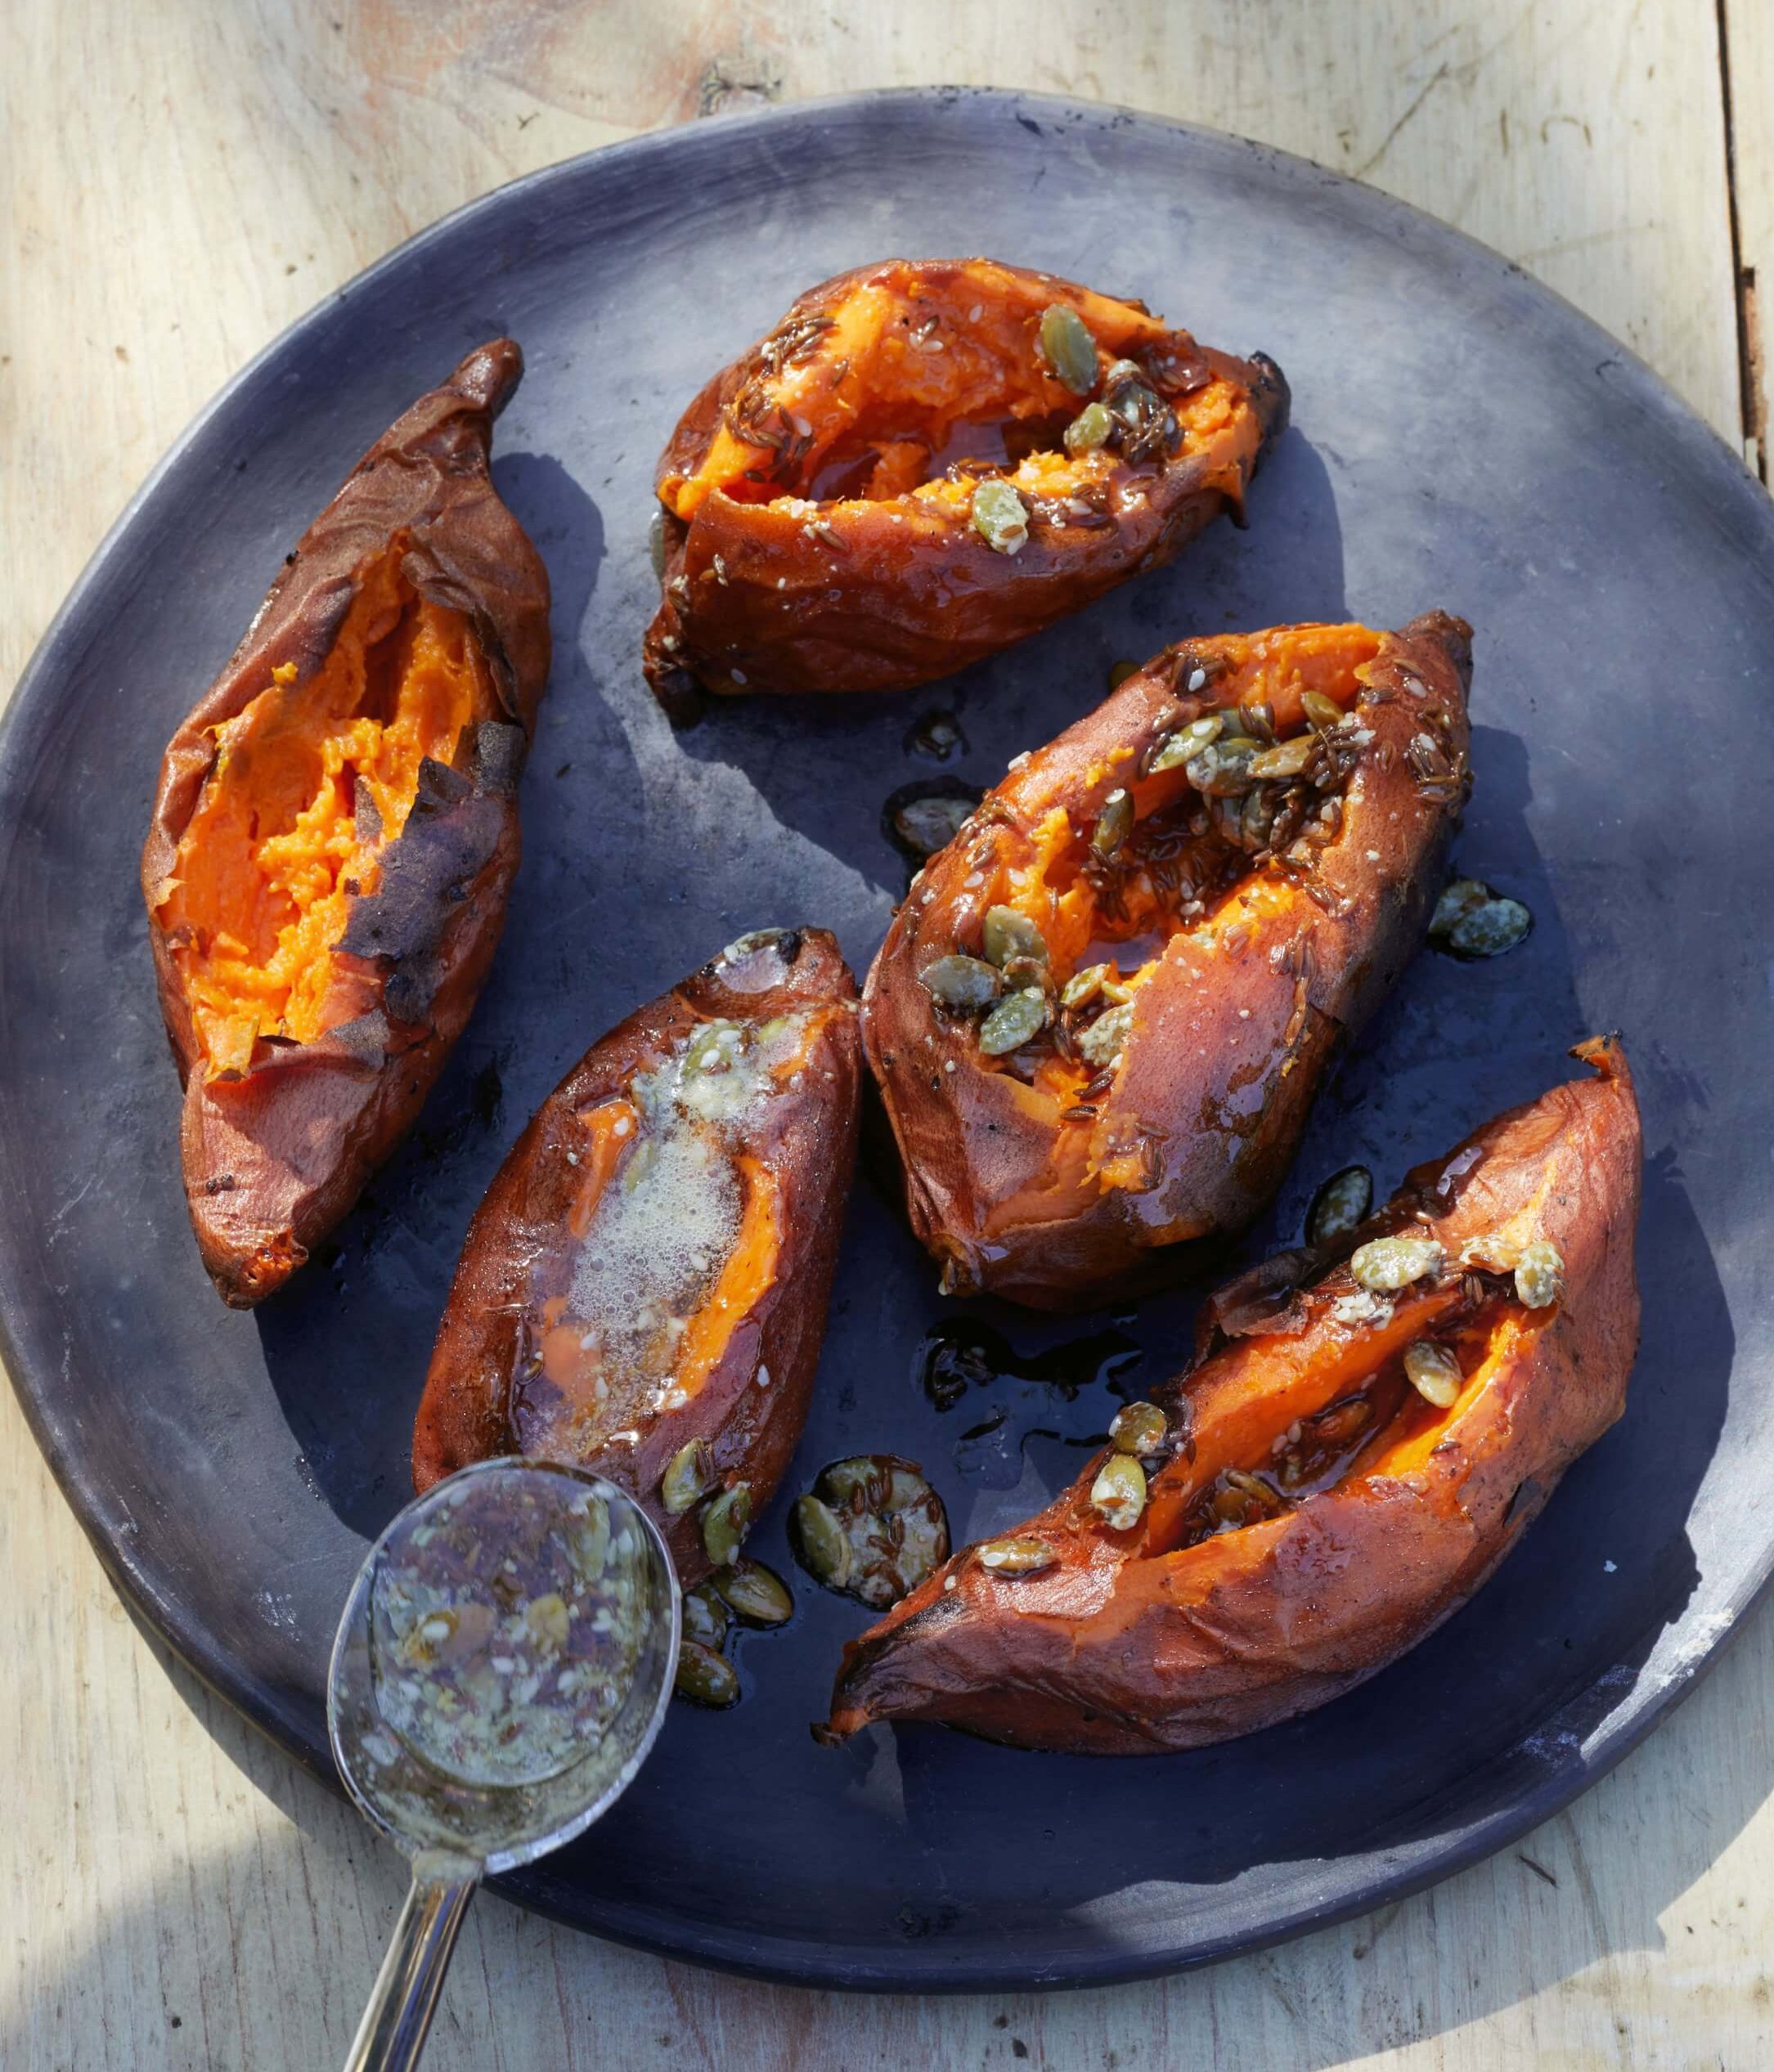 A dark blue dish with roasted sweet potatoes and a spoon visible